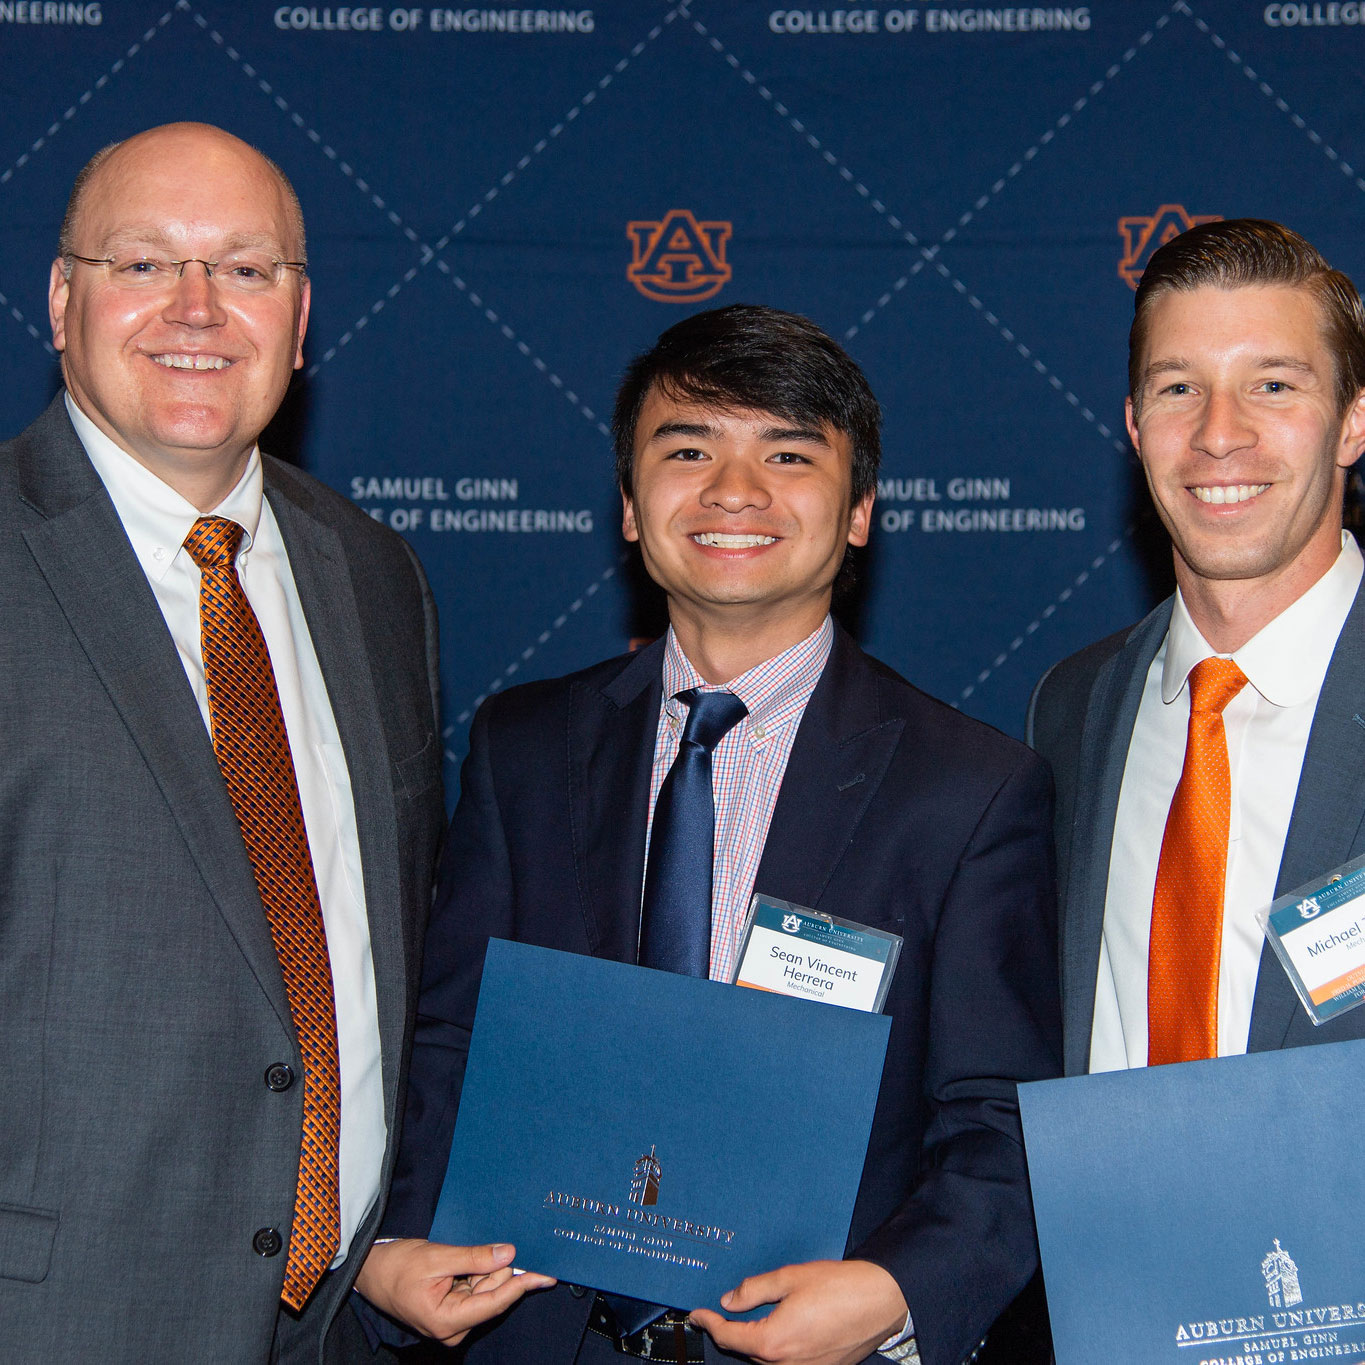 Sean Herrera, senior in mechanical engineering, and Michael Zabala, assistant professor of mechanical engineering, were the winners of the Mark A. Spencer Creative Mentorship Award. They are pictured with Dean Christopher B. Roberts.